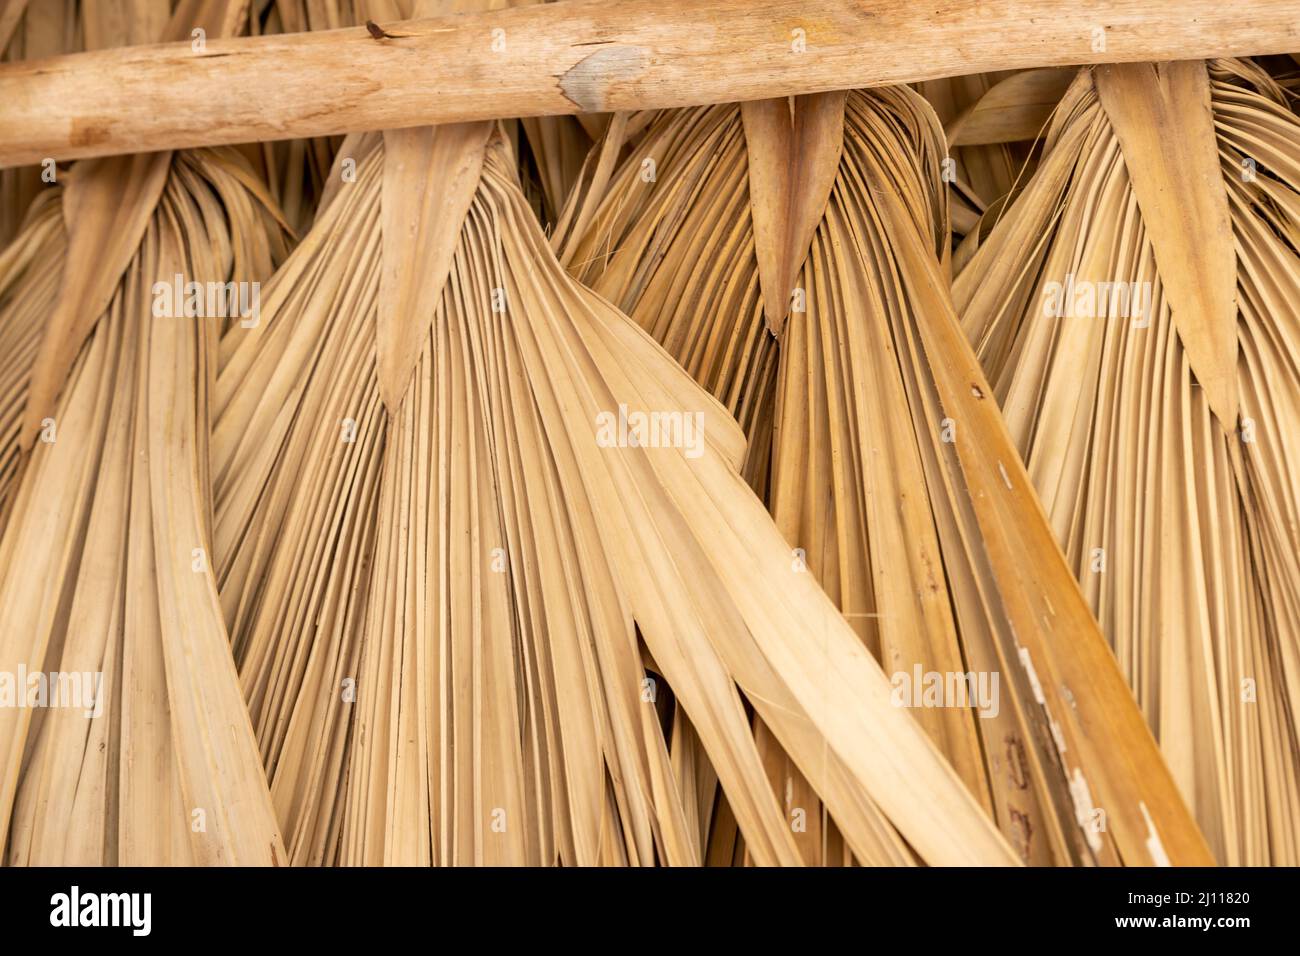 Palm tree roof, dry palm leaves abstract background texture Stock Photo